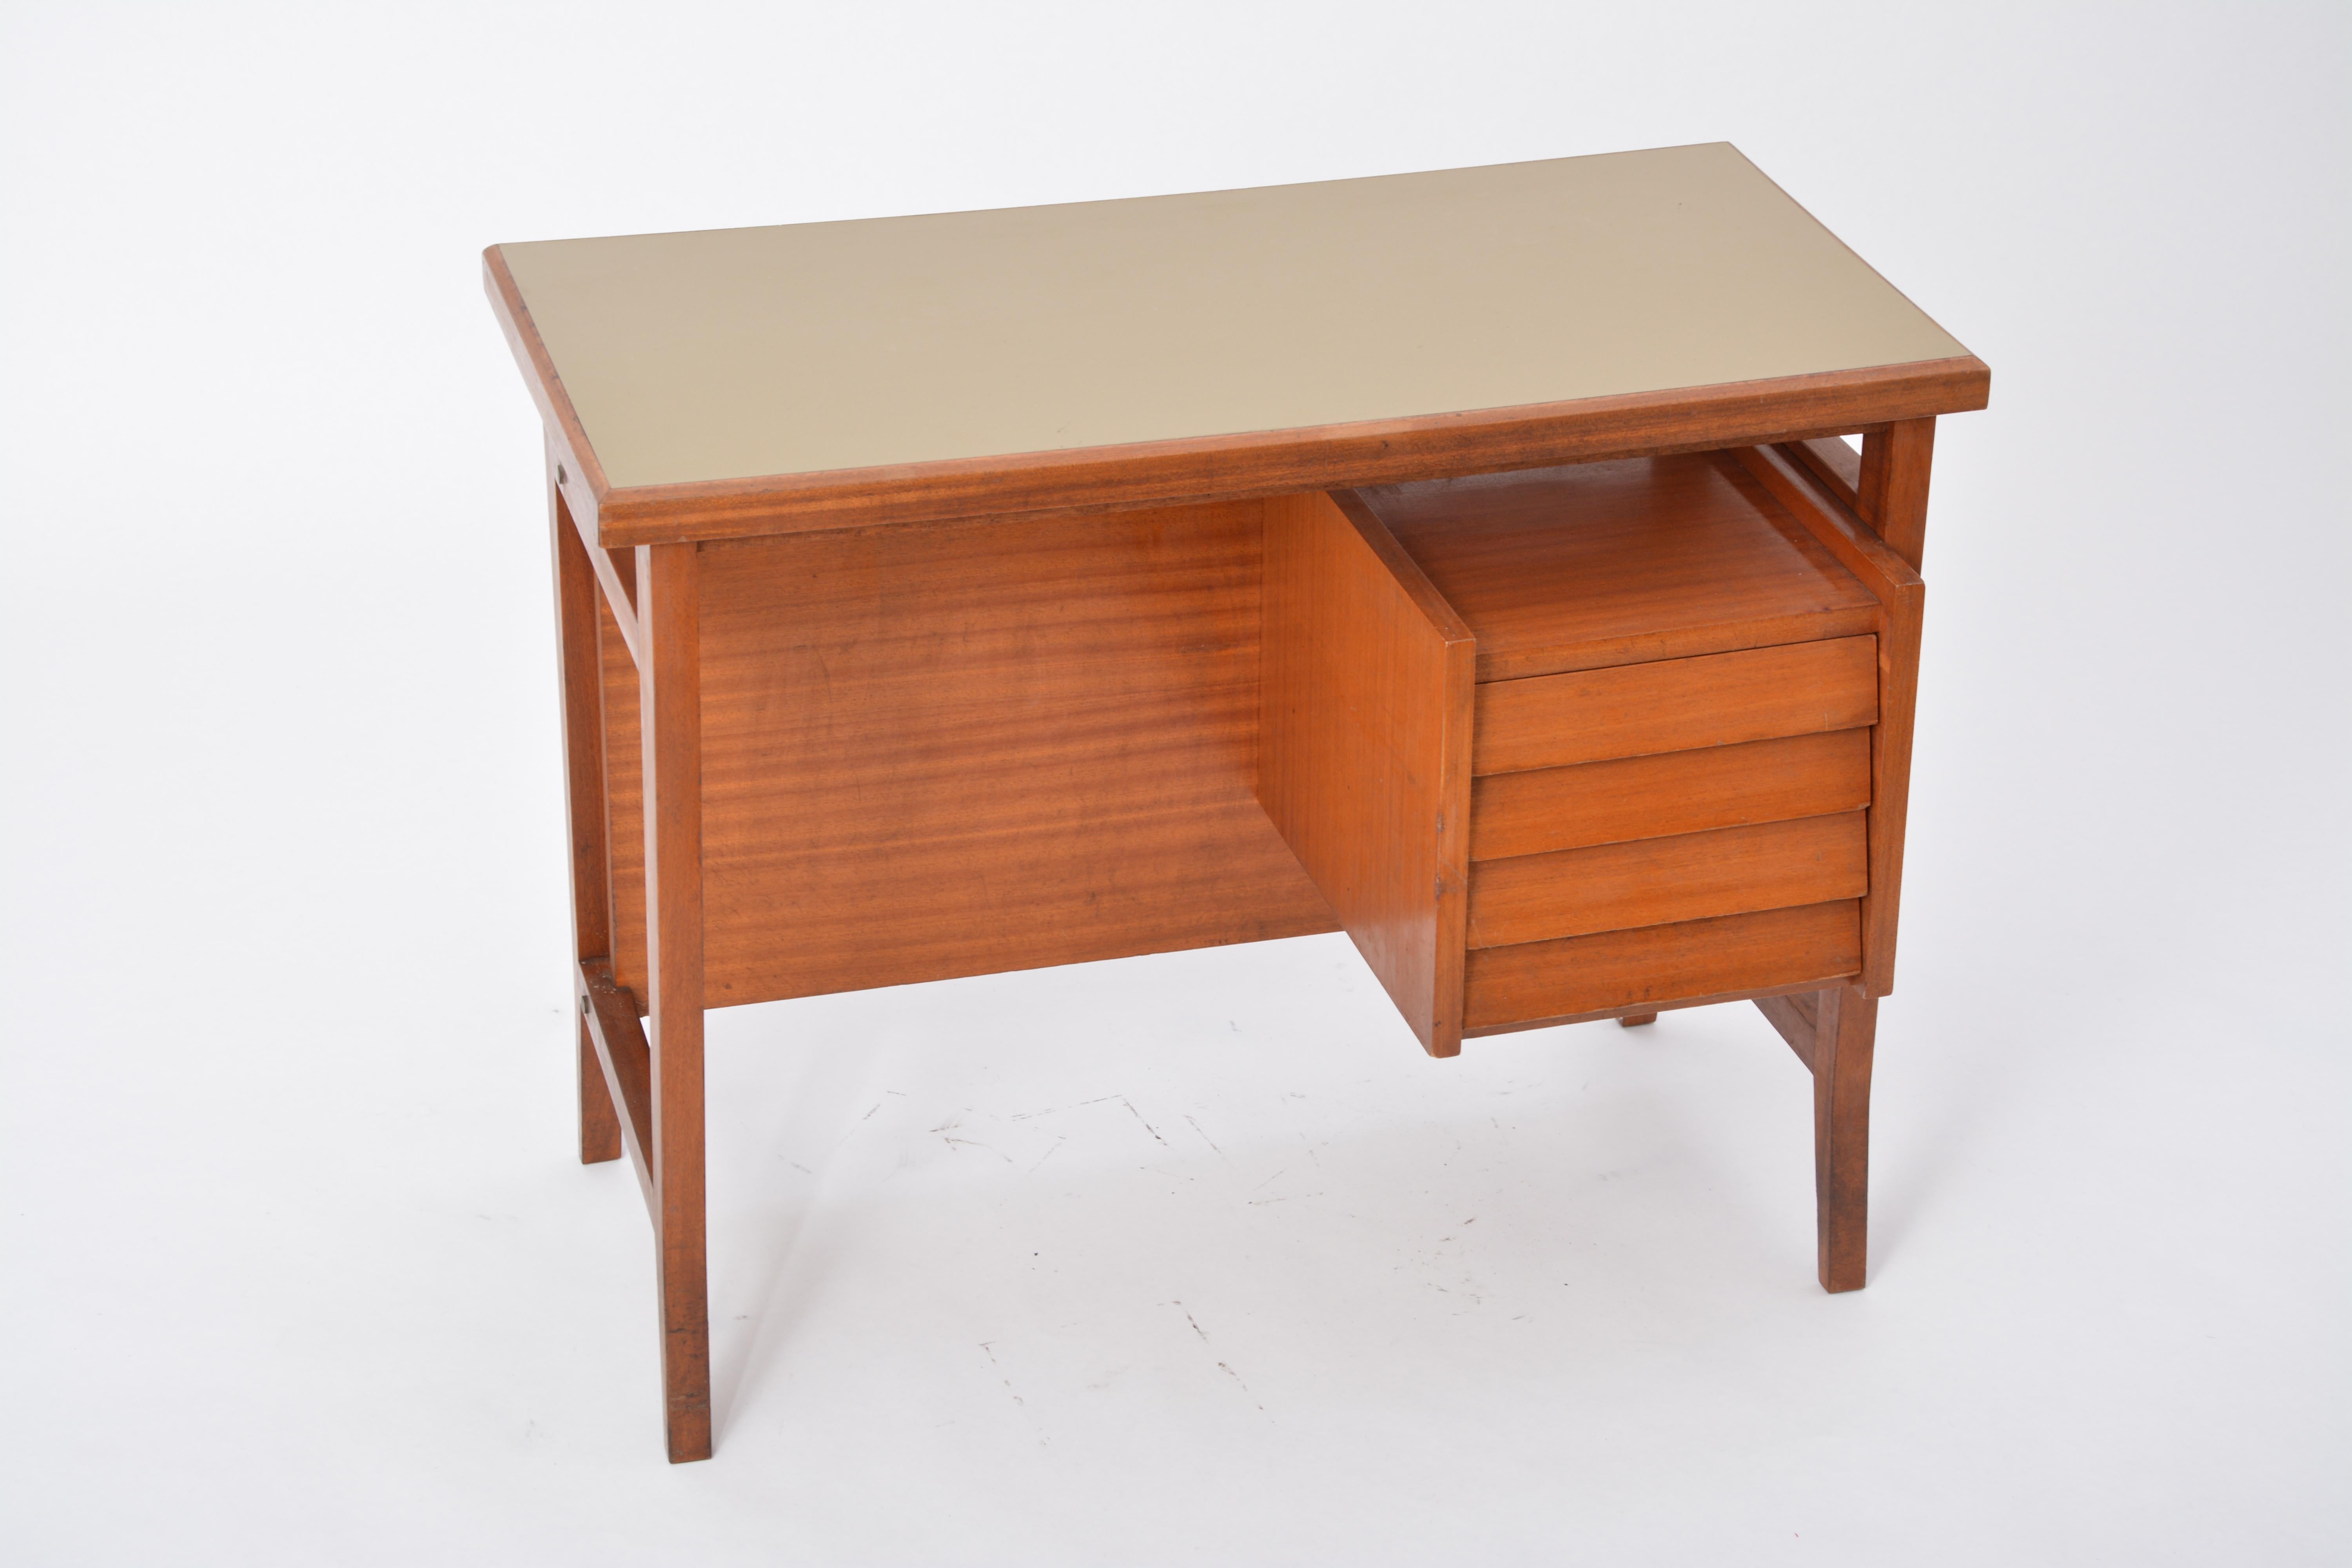 Small Writing Desk by Gio Ponti for Schirolli, Italy, 1960s (Moderne der Mitte des Jahrhunderts)